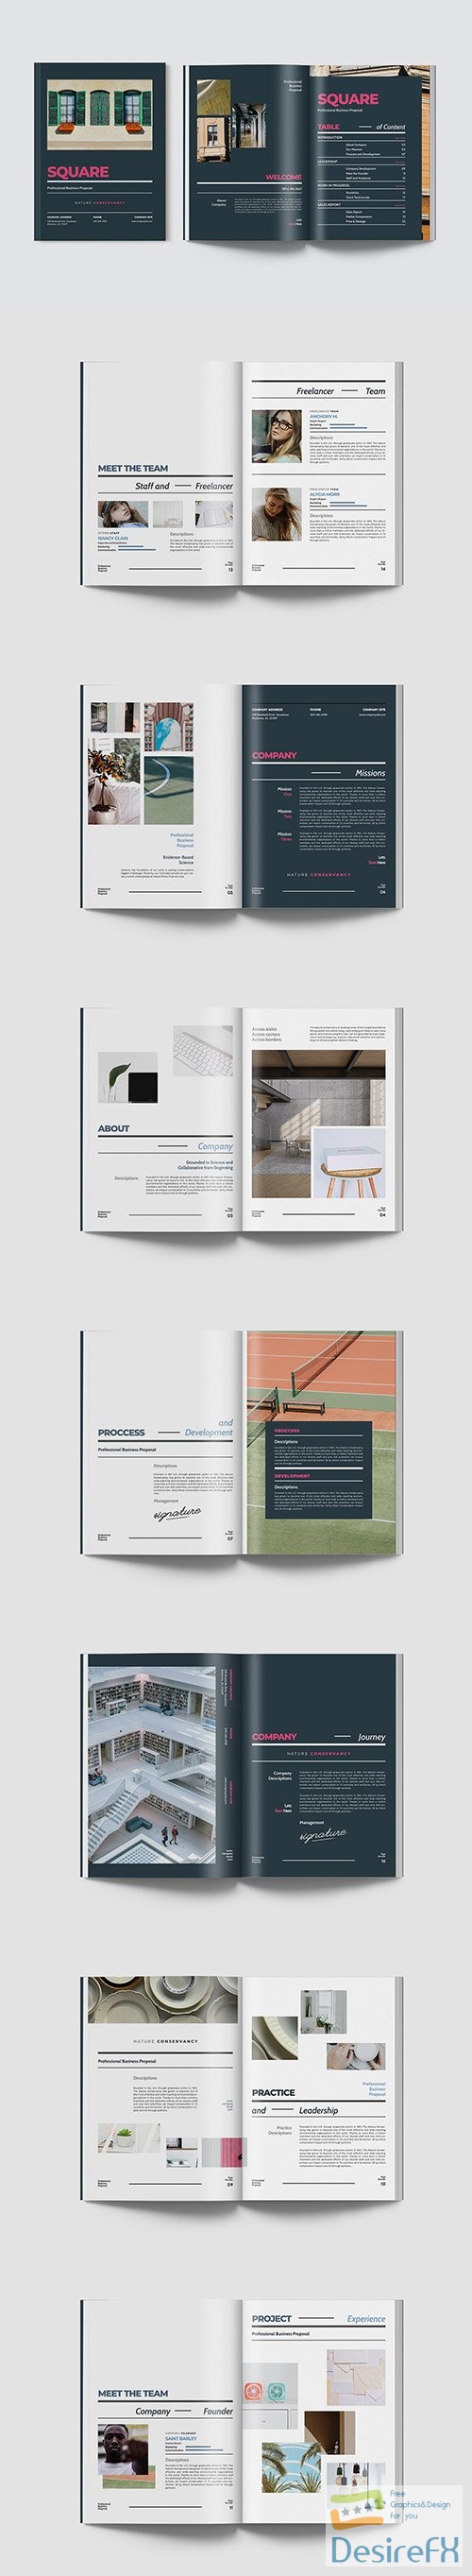 Square - Professional Business Proposal Indesign 2DF4BET